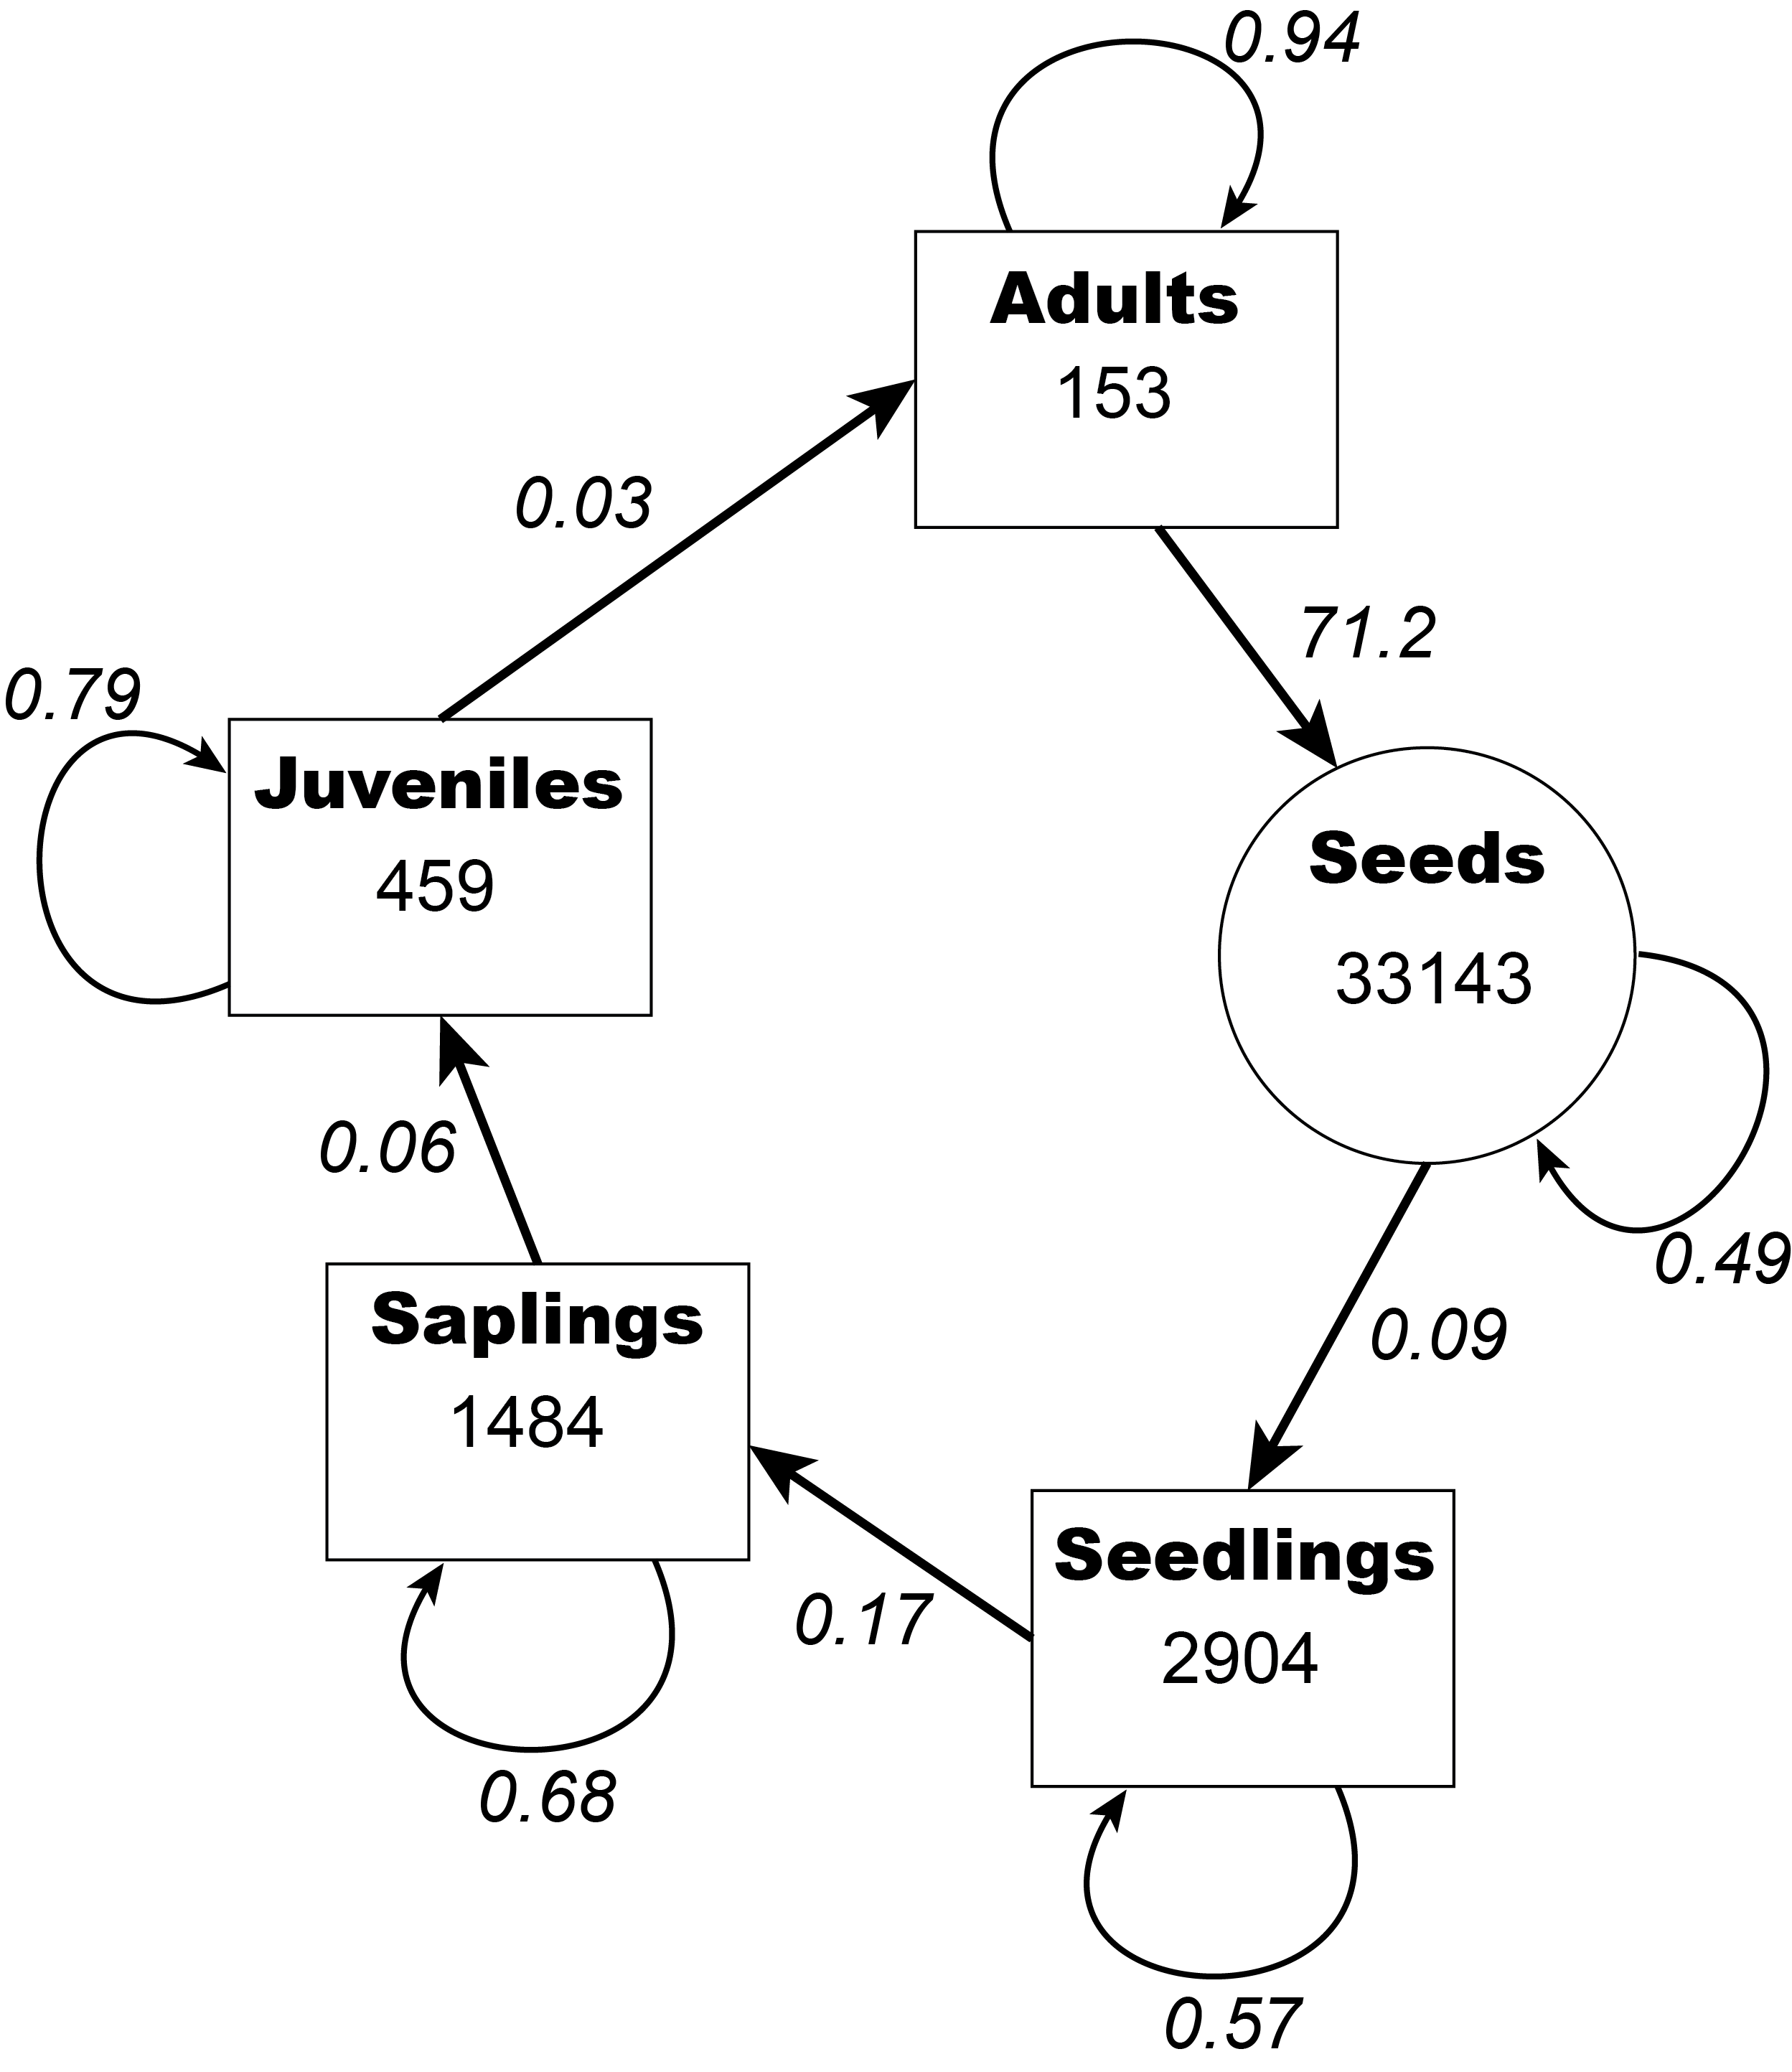 Demography of *Thrinax imaginarium* life stages. Values inside the circle/squares are the observed number of individuals in each stage class from a single demographic study of the species. Values next to the arrows are the estimated transition probabilities for each stage